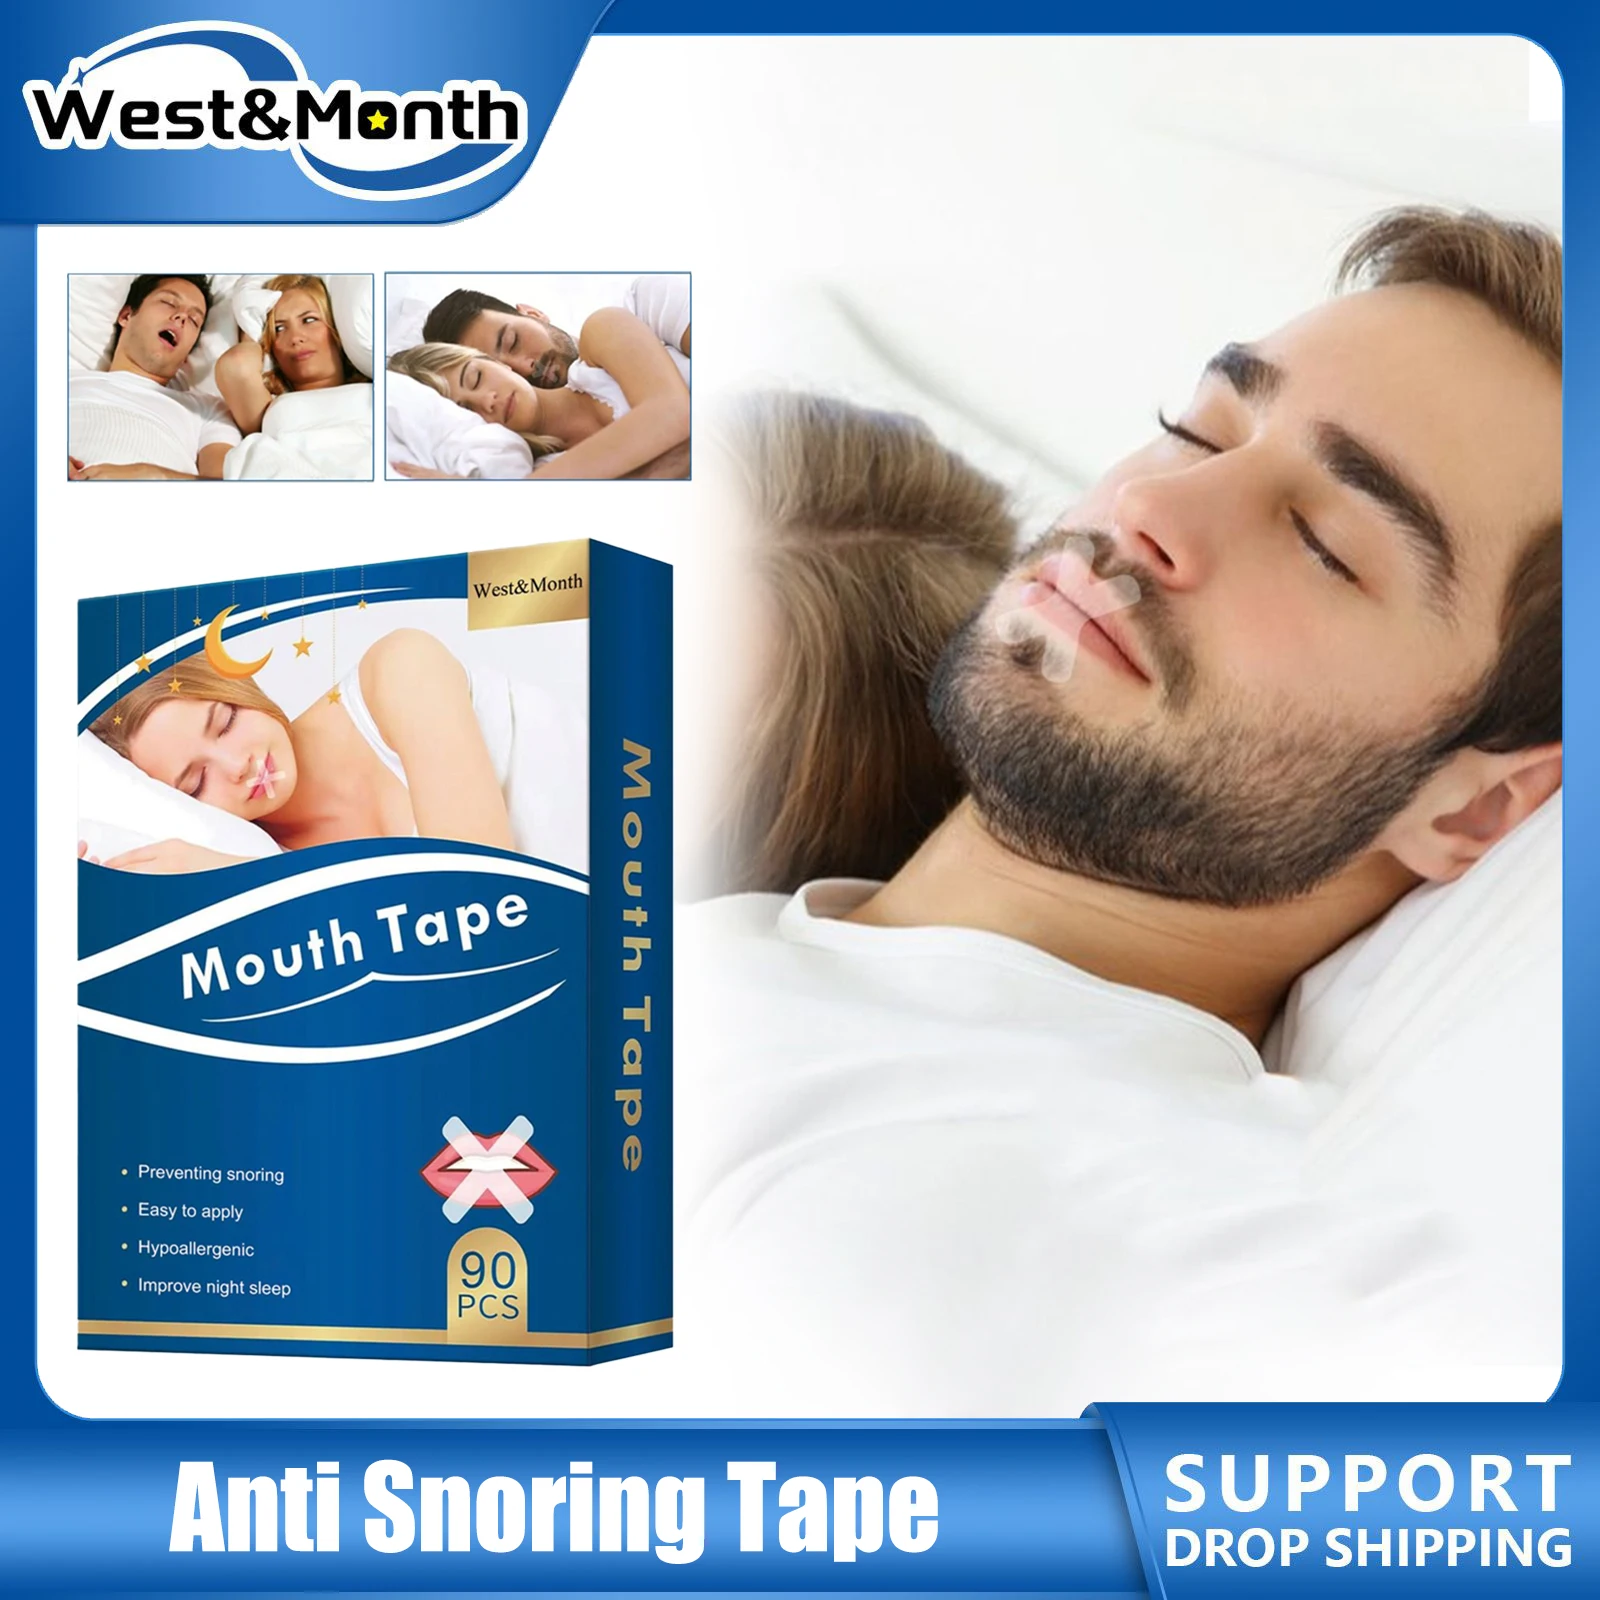 Anti Snoring Mouth Tape Through The Nose Effective Breathing Nighttime Sleeping Reduce Snore Health Care Relax Body Sleep Strip rely велосипедки спортивные nighttime